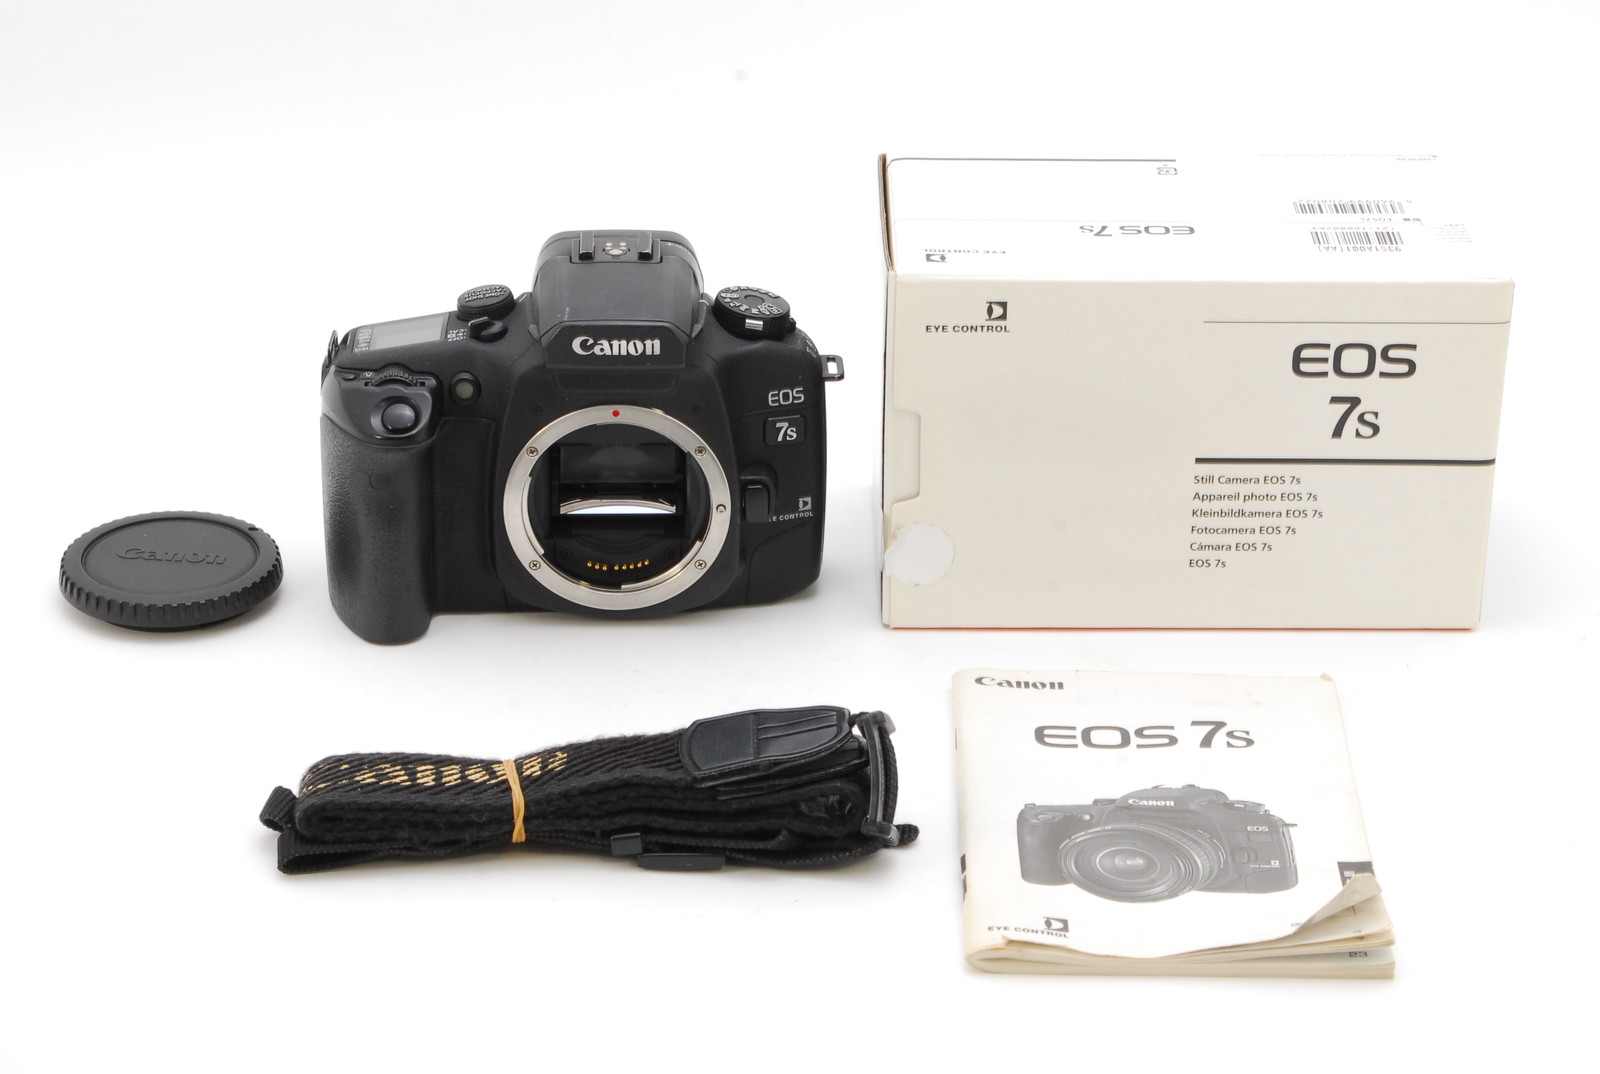 PROMOTION. NEAR MINT Canon EOS 7s 35mm Film Camera, Box, Manual, Strap, Body Cap from Japan